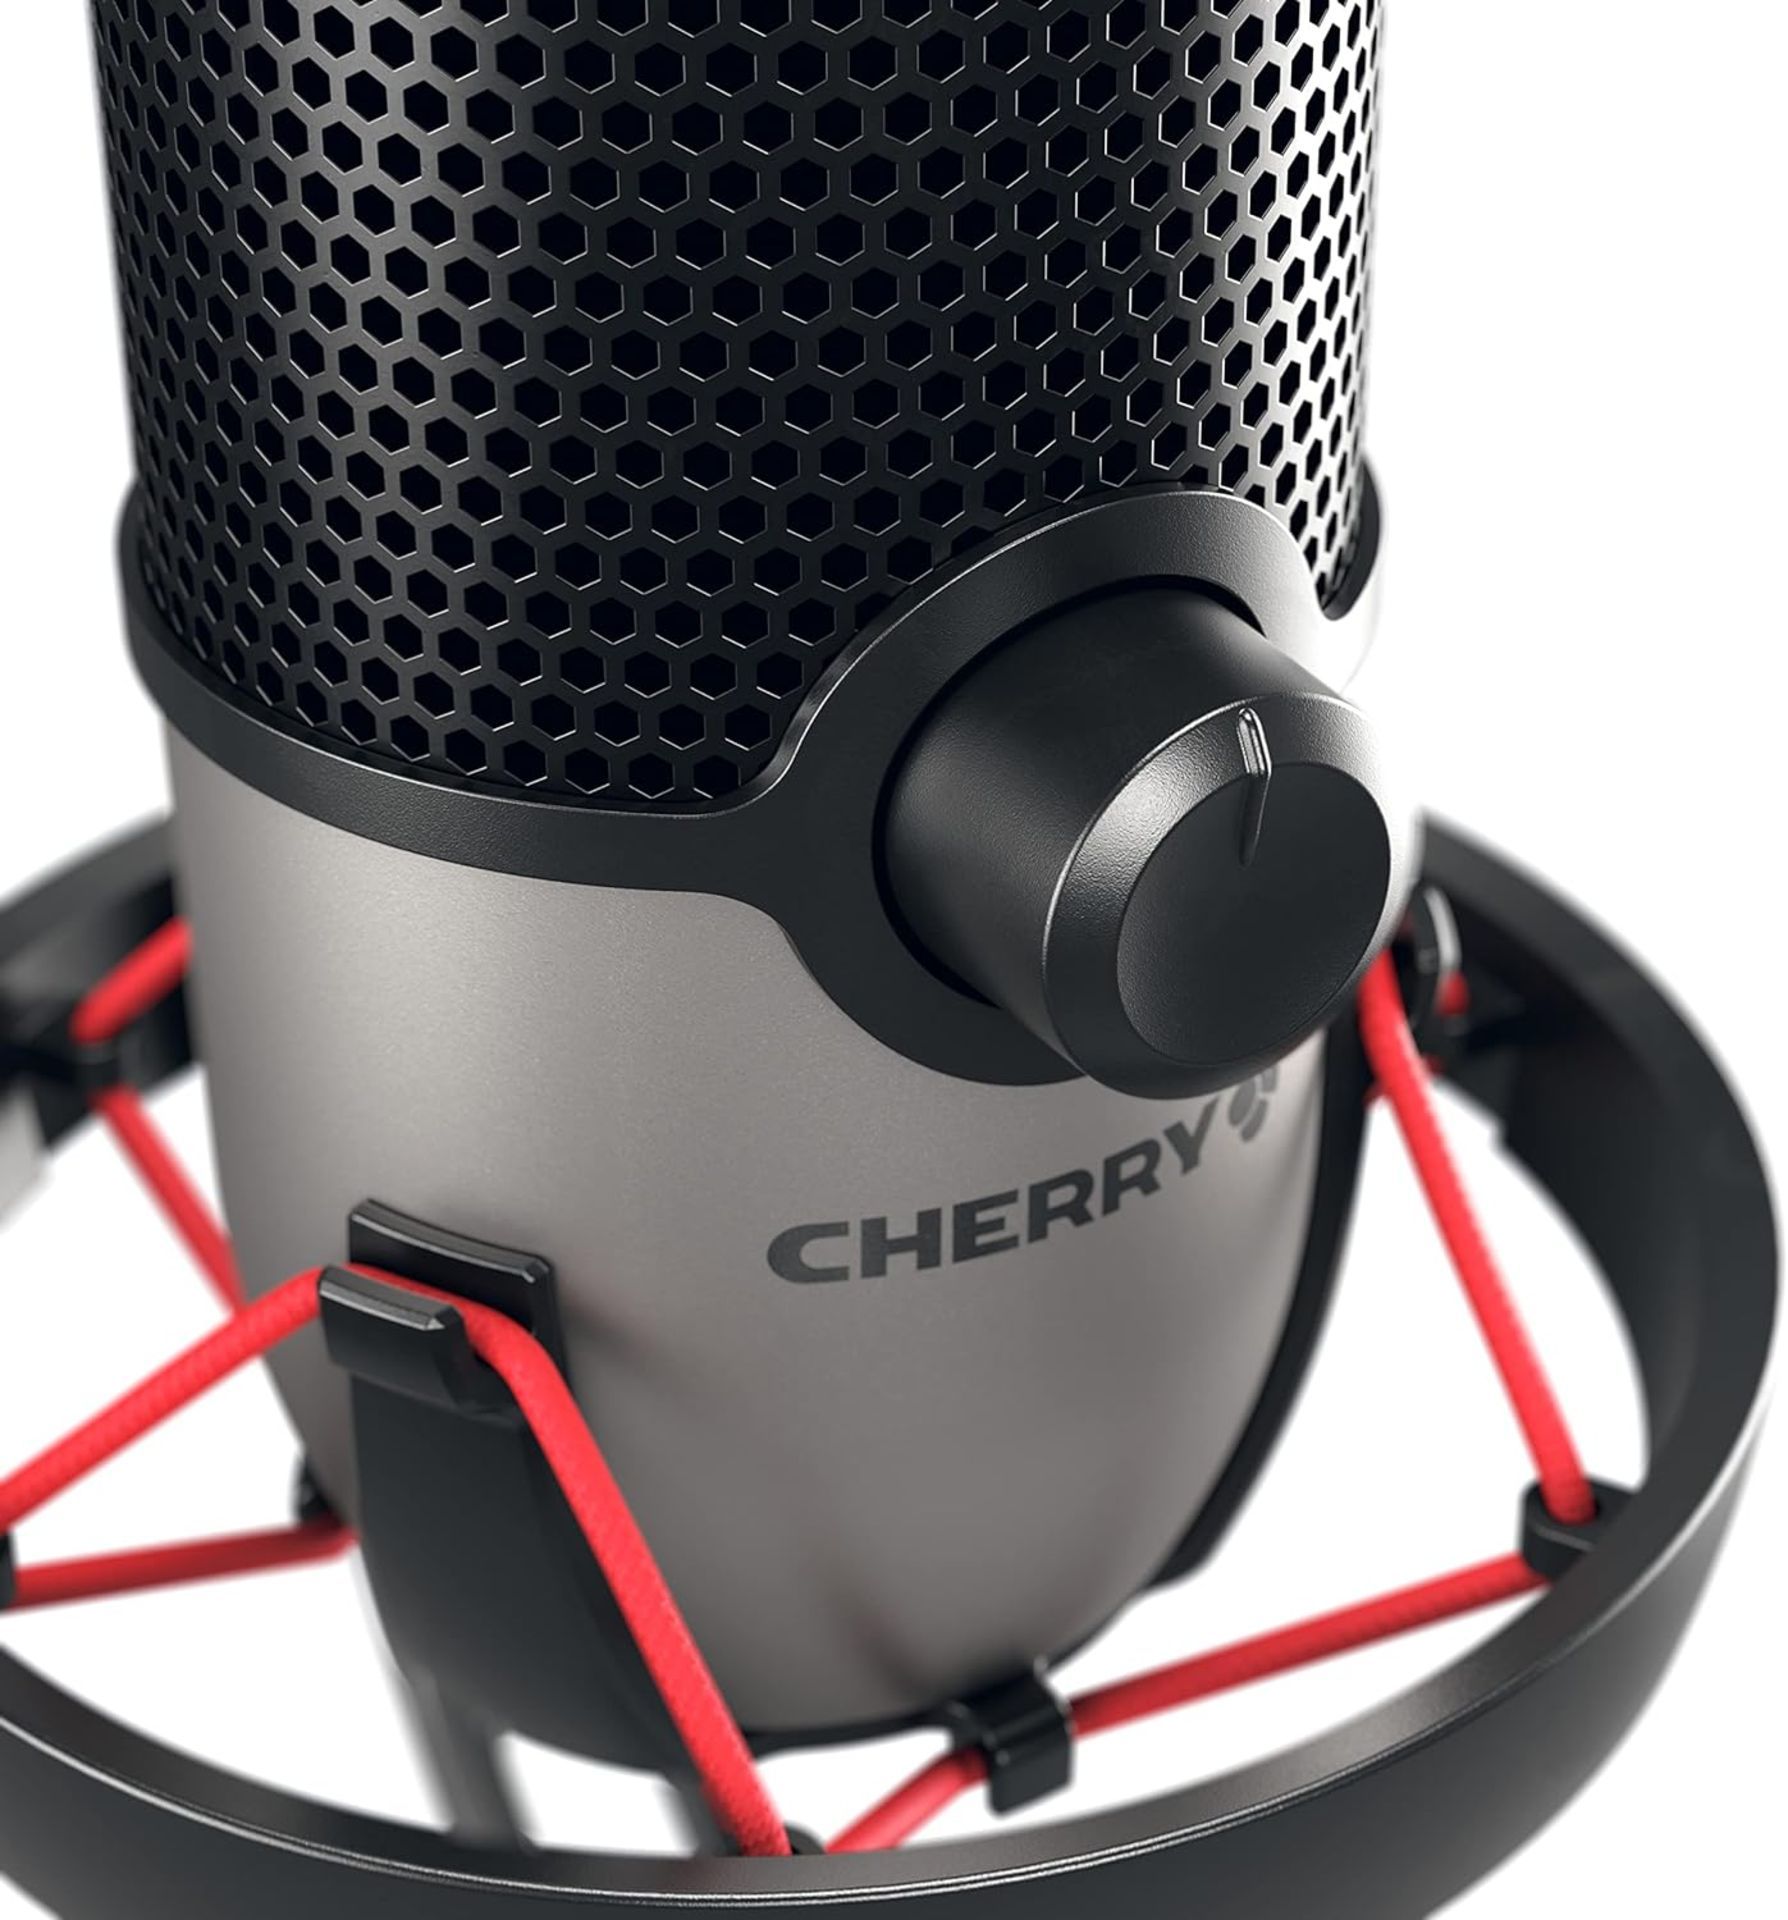 NEW & BOXED CHERRY UM 6.0 Advanced USB Microphone. RRP £89.99. Stylish desktop microphone with USB-C - Image 6 of 7